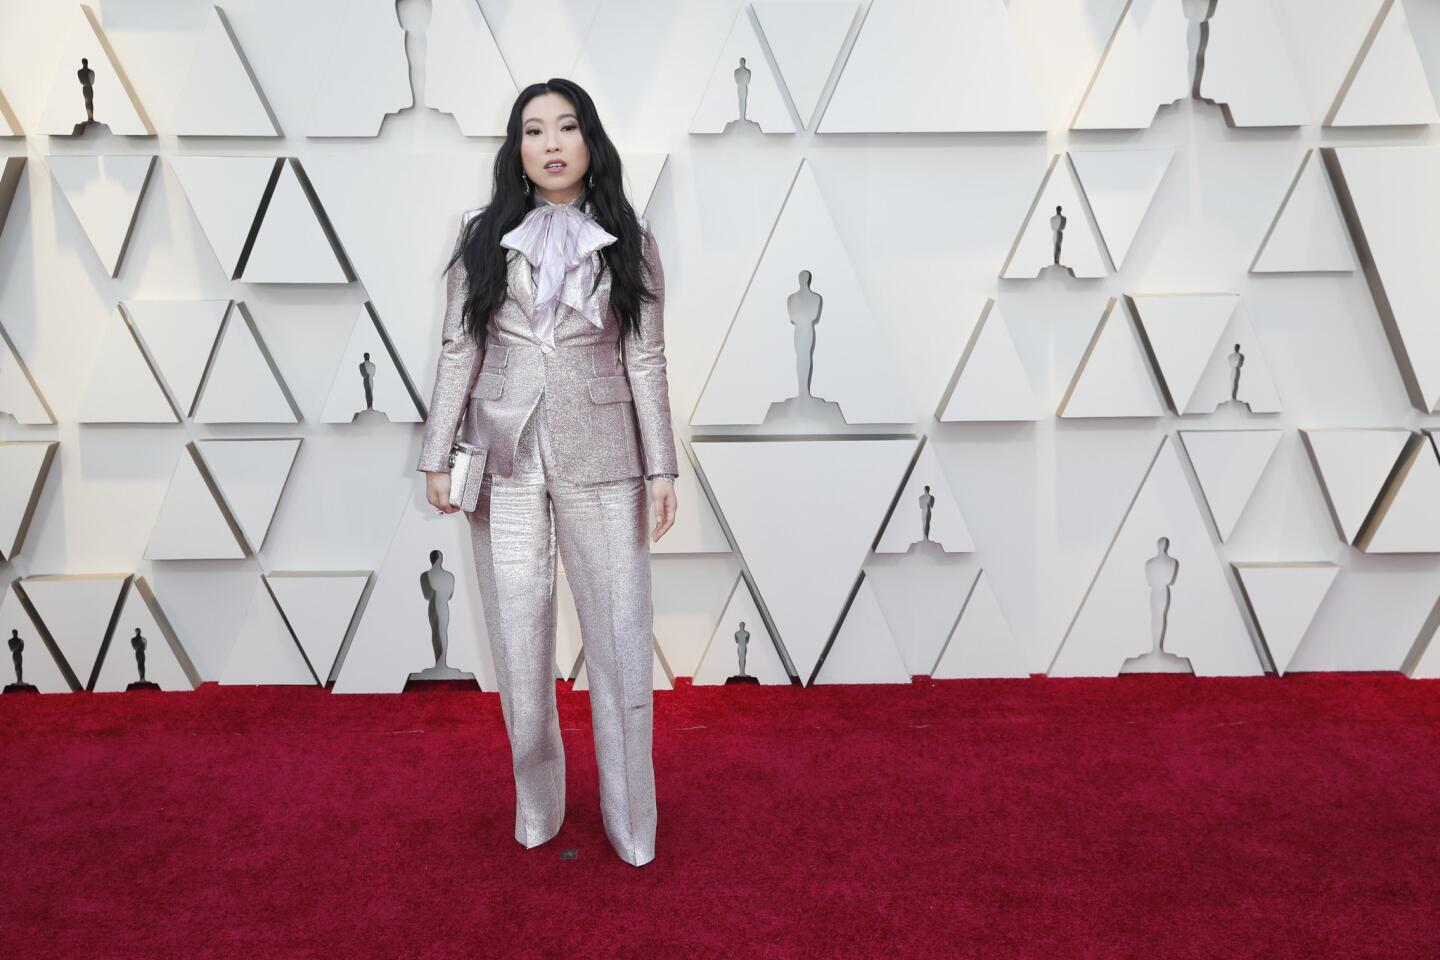 HIT: Awkwafina brings her best “Austin Powers” look with a giant bow shirt under a glittering pink suit by DSquared2. (The actress-singer said the Canadian brothers “have been dressing me since the beginning.”)